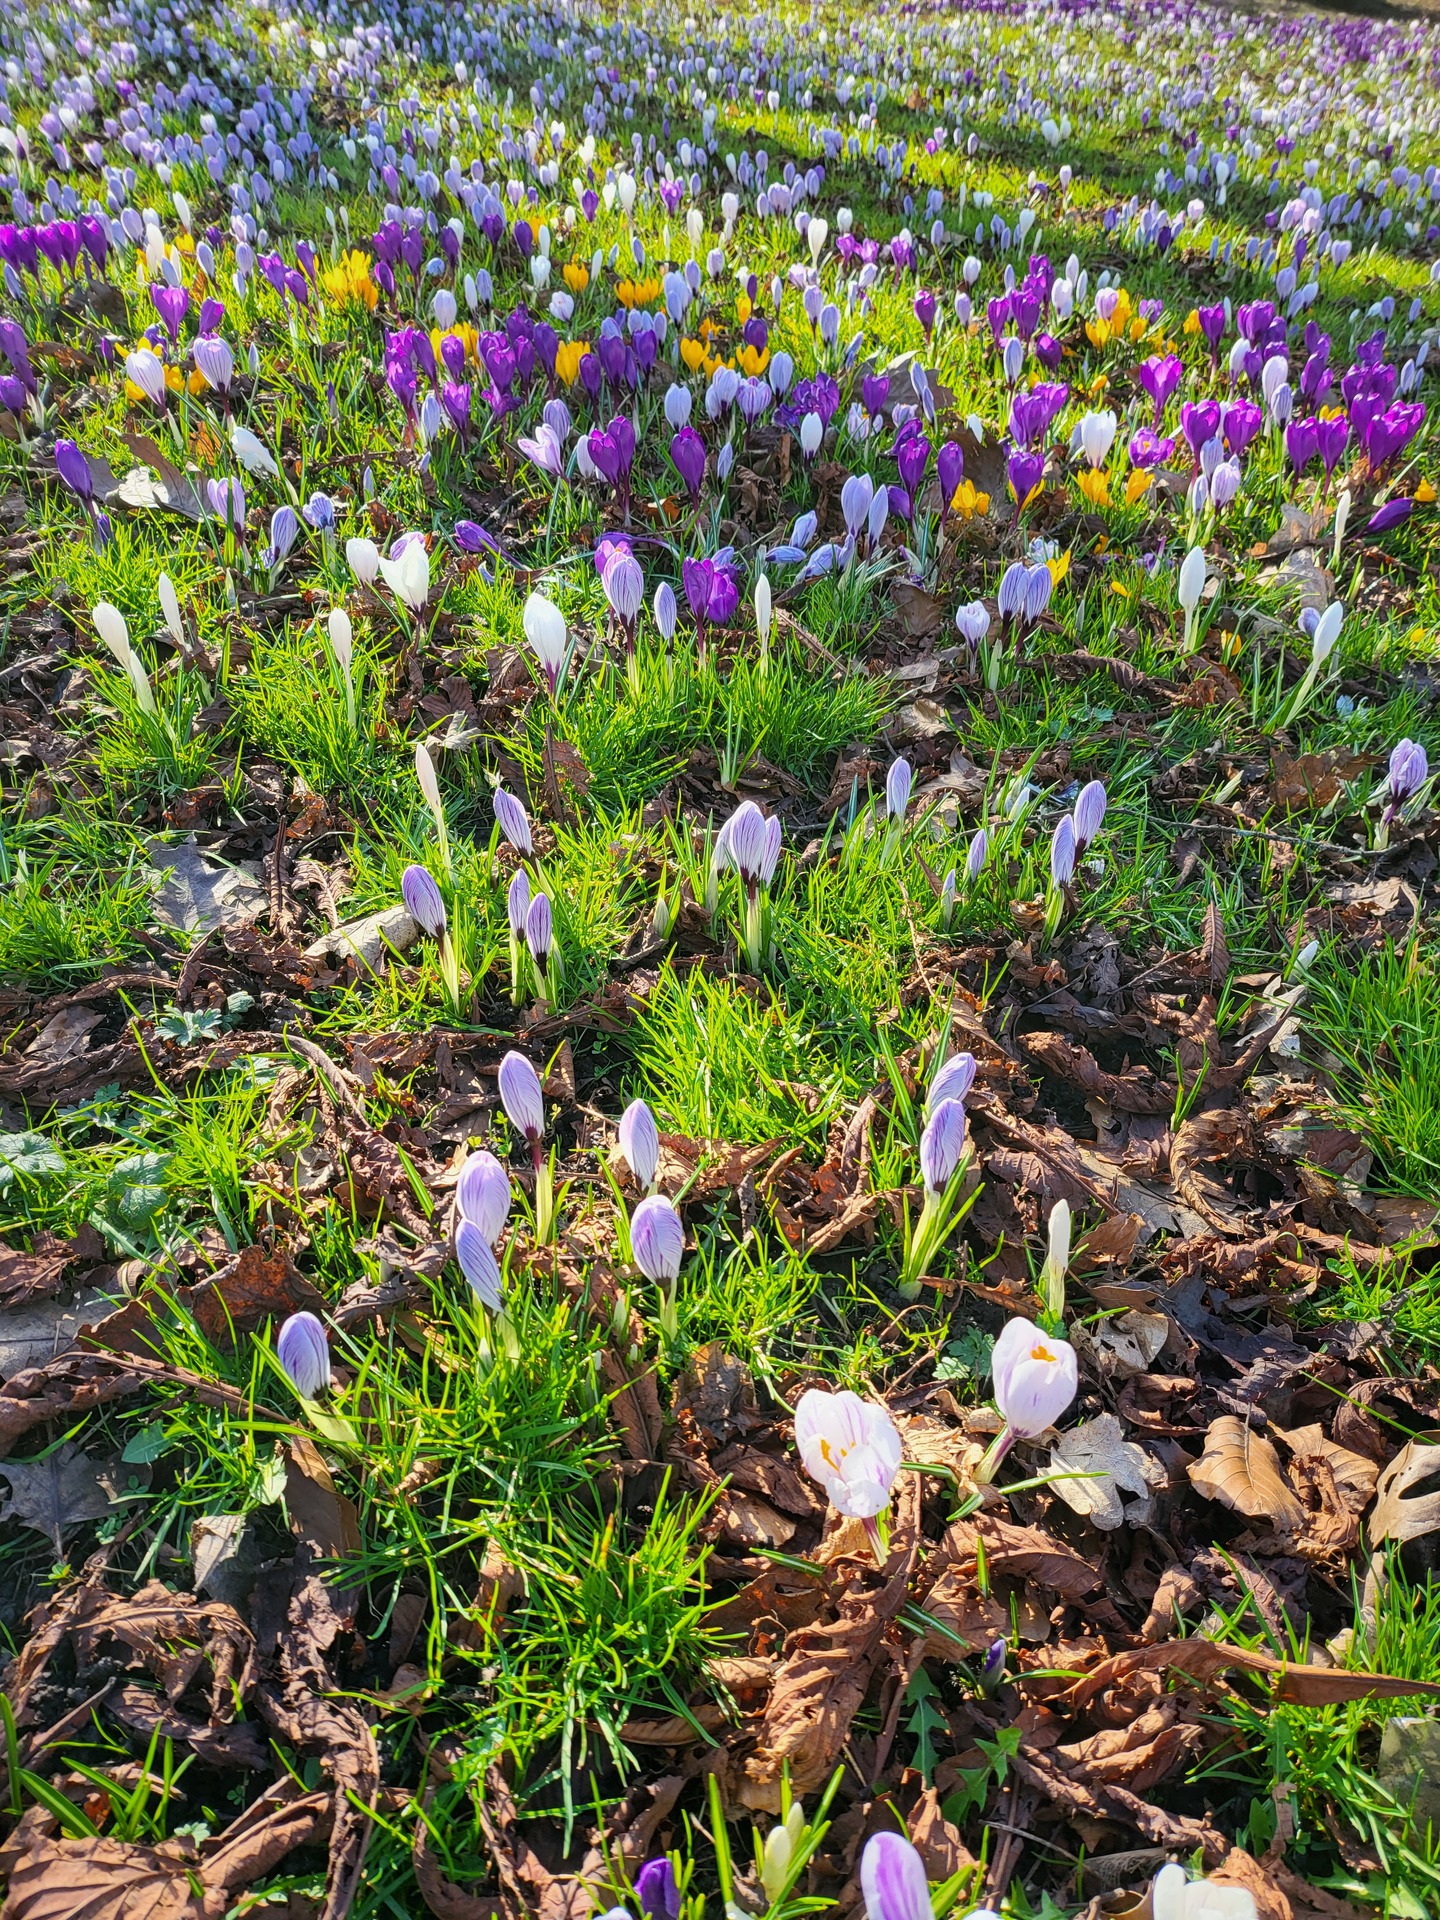 Harrogate Flower Shows. Attracting a combined audience of up to 90,000 visitors each year, our Spring and Autumn shows stage the very best in gardening and horticulture. crocuses